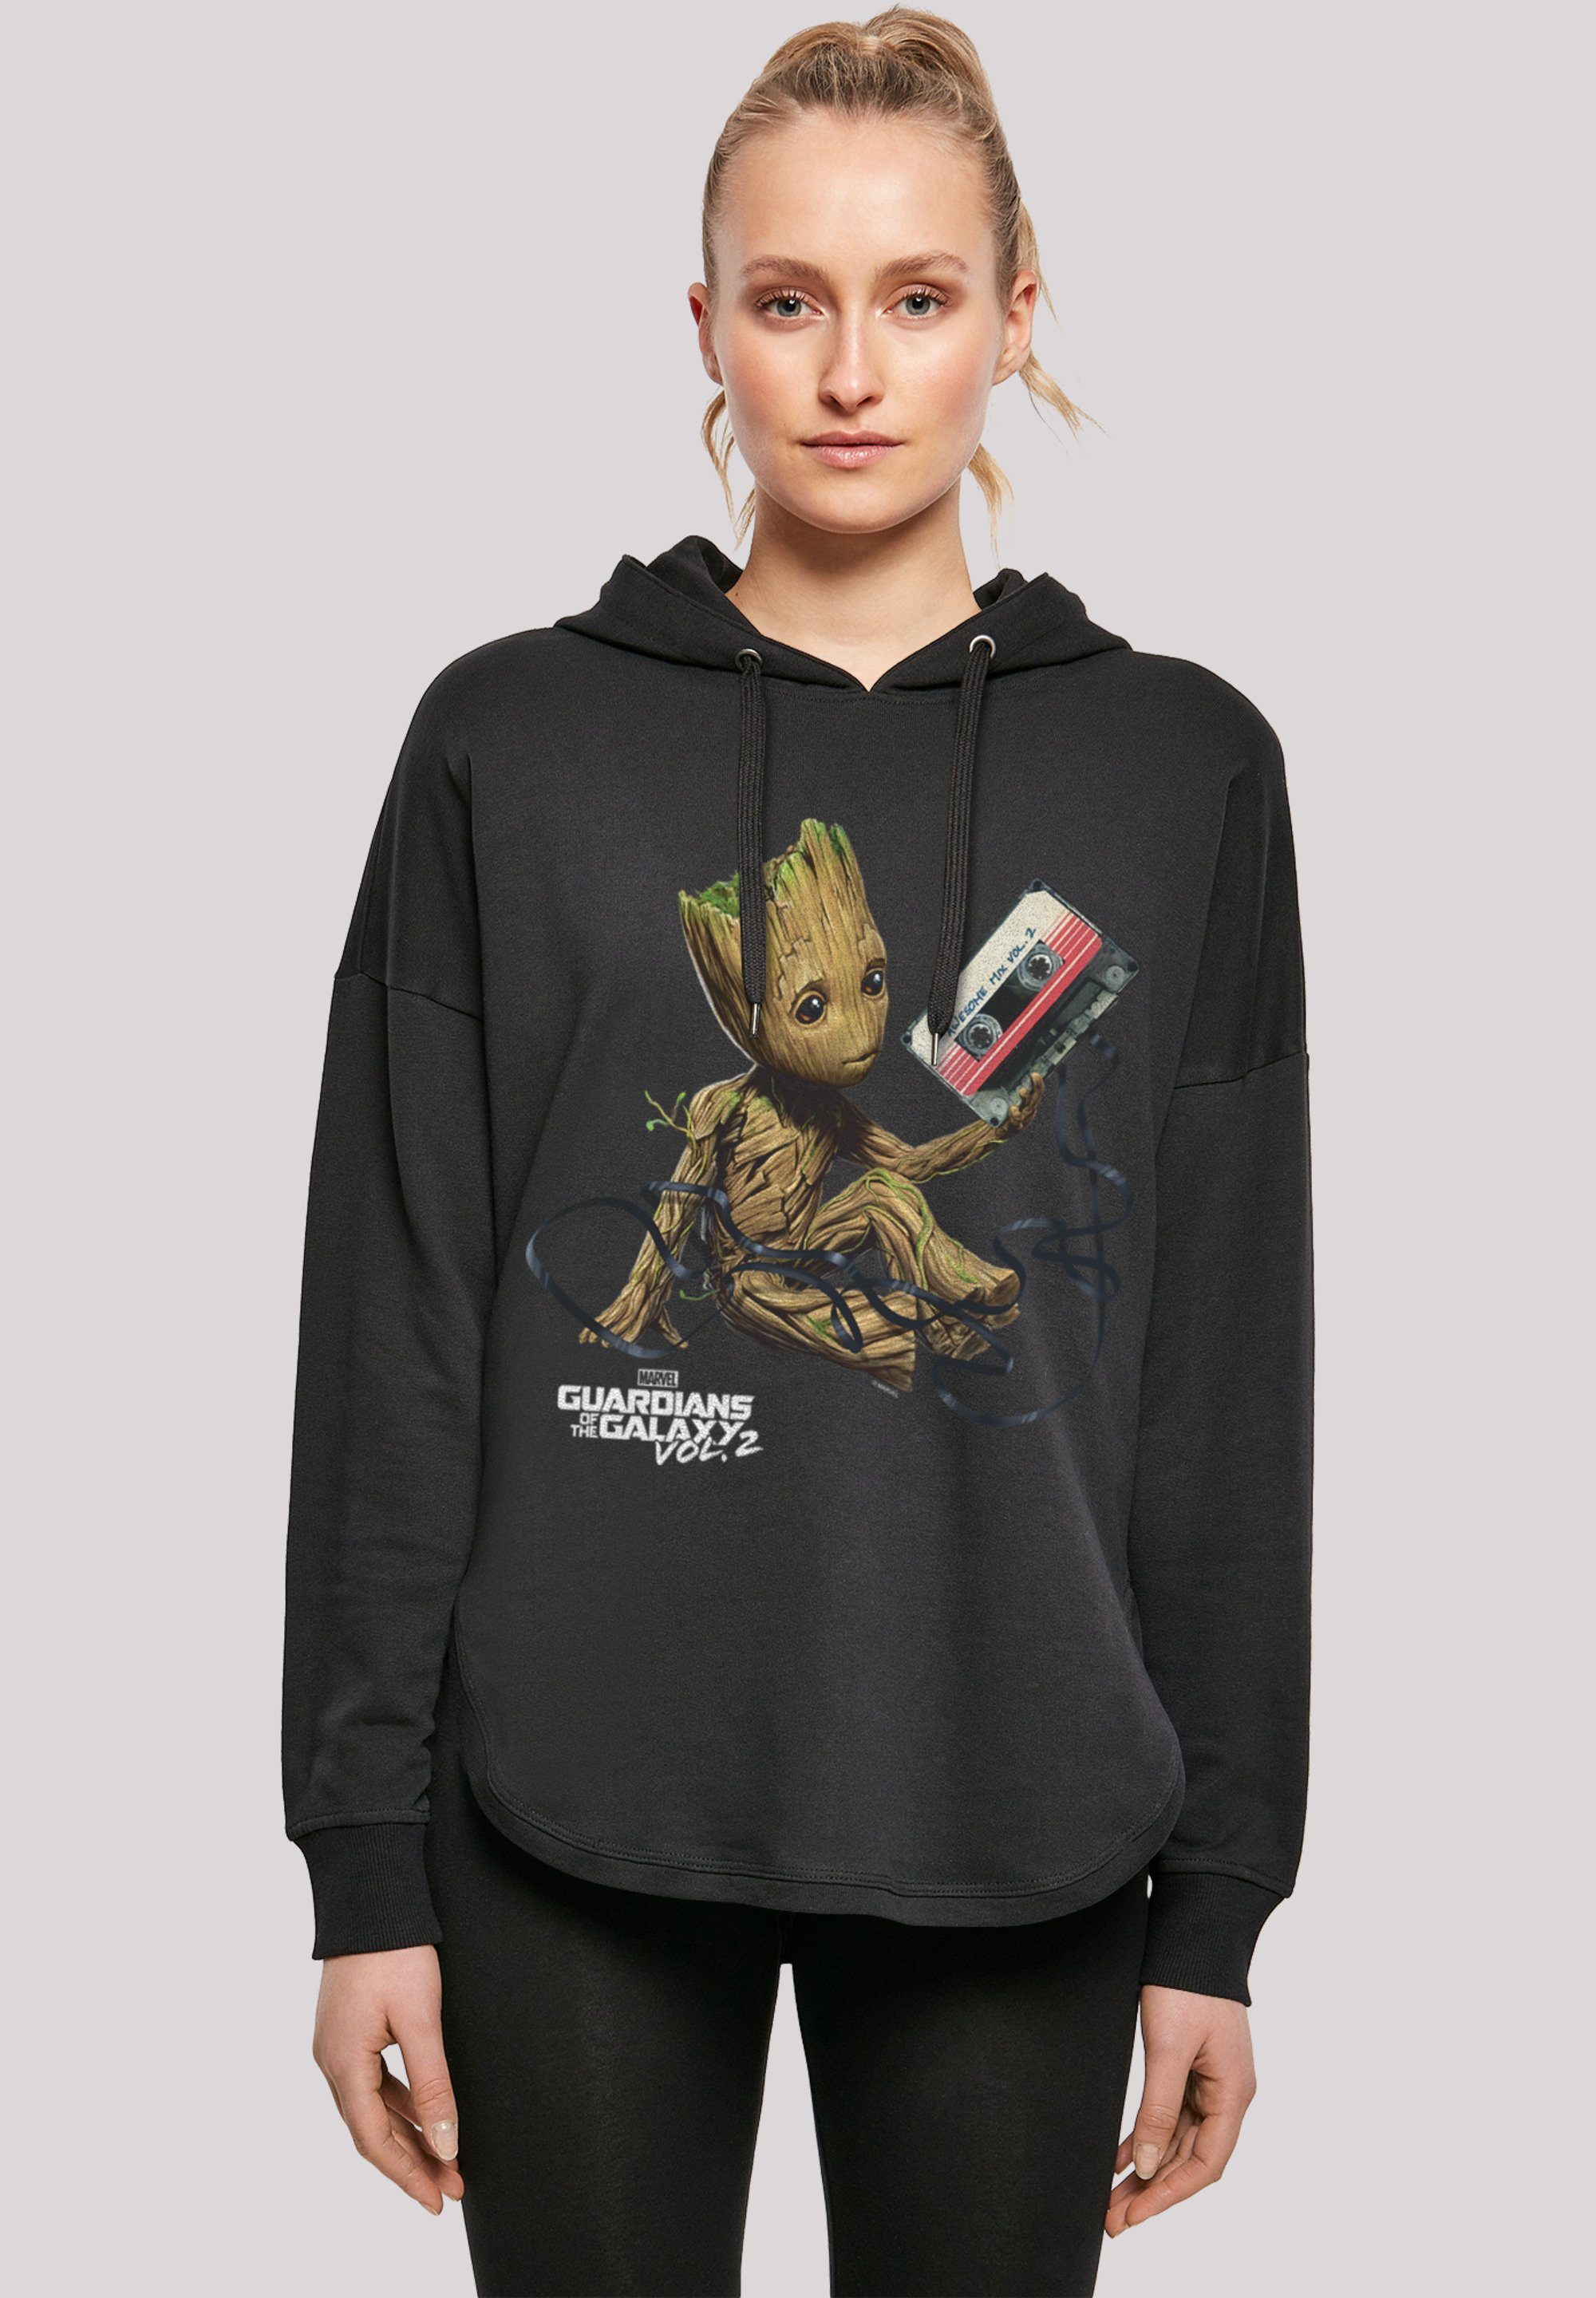 Groot the Galaxy The Tape F4NT4STIC Of Marvel Kapuzenpullover of Guardians Print, Marvel Guardians Vol2 Galaxy